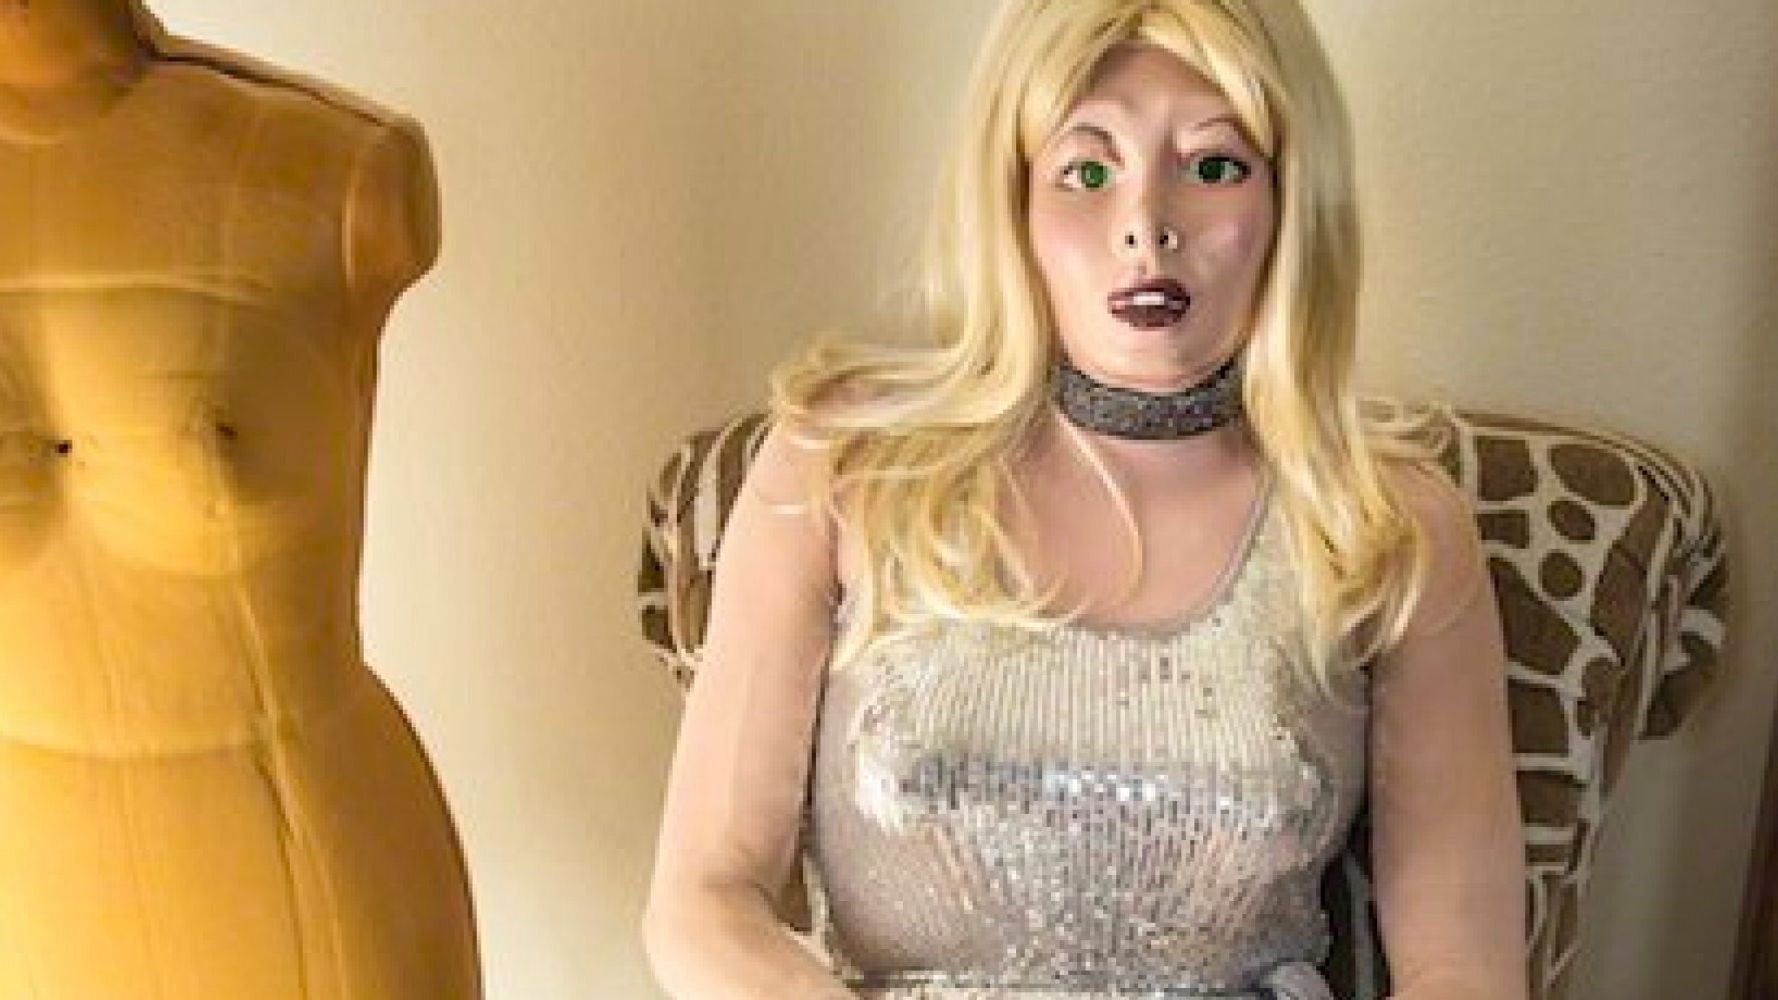 Meet The Man Who Wears A Femskin Suit To Live As Female Rubber Doll